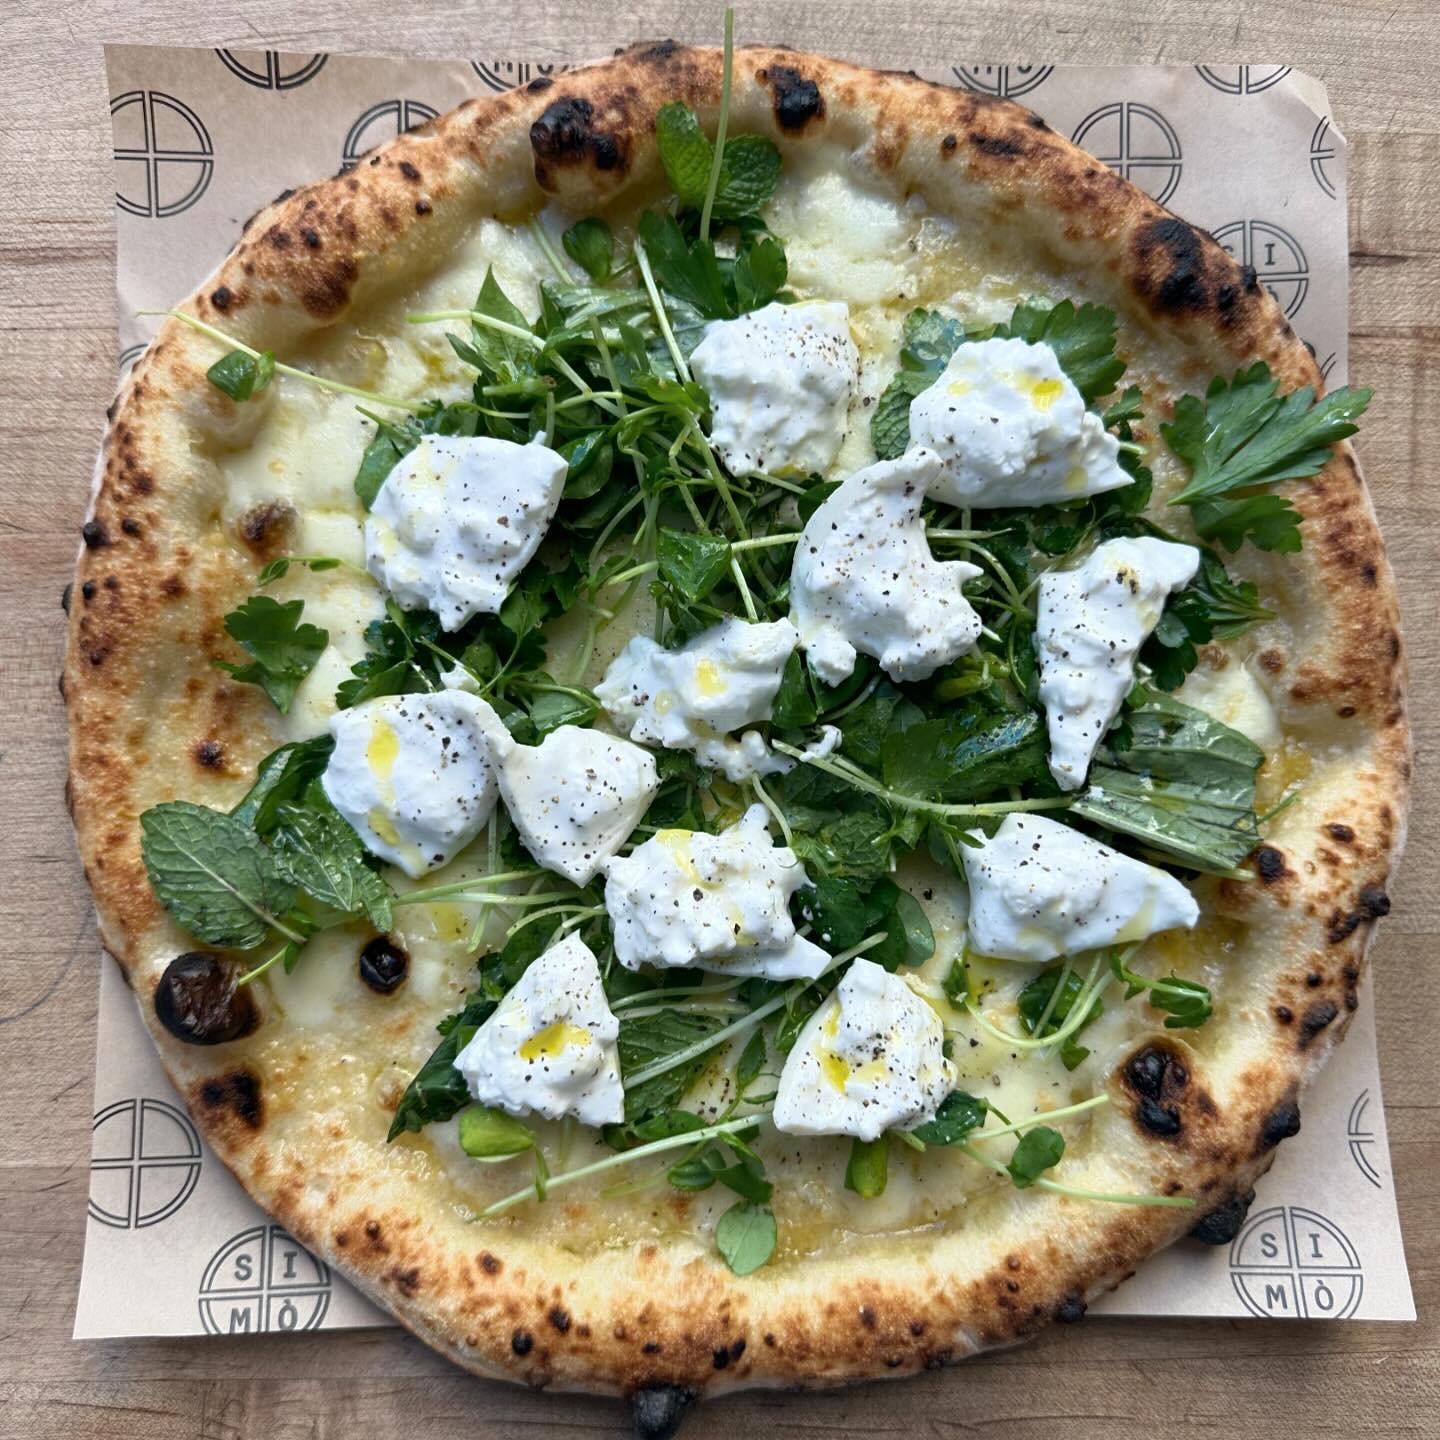 Have you tried our Pizza Primavera yet? With a &ldquo;base bianca&rdquo; (which is a &ldquo;white base&rdquo; meaning that there is not tomato sauce) this special pizza of the month features the best of the season, such as spring pea shoots, mint and